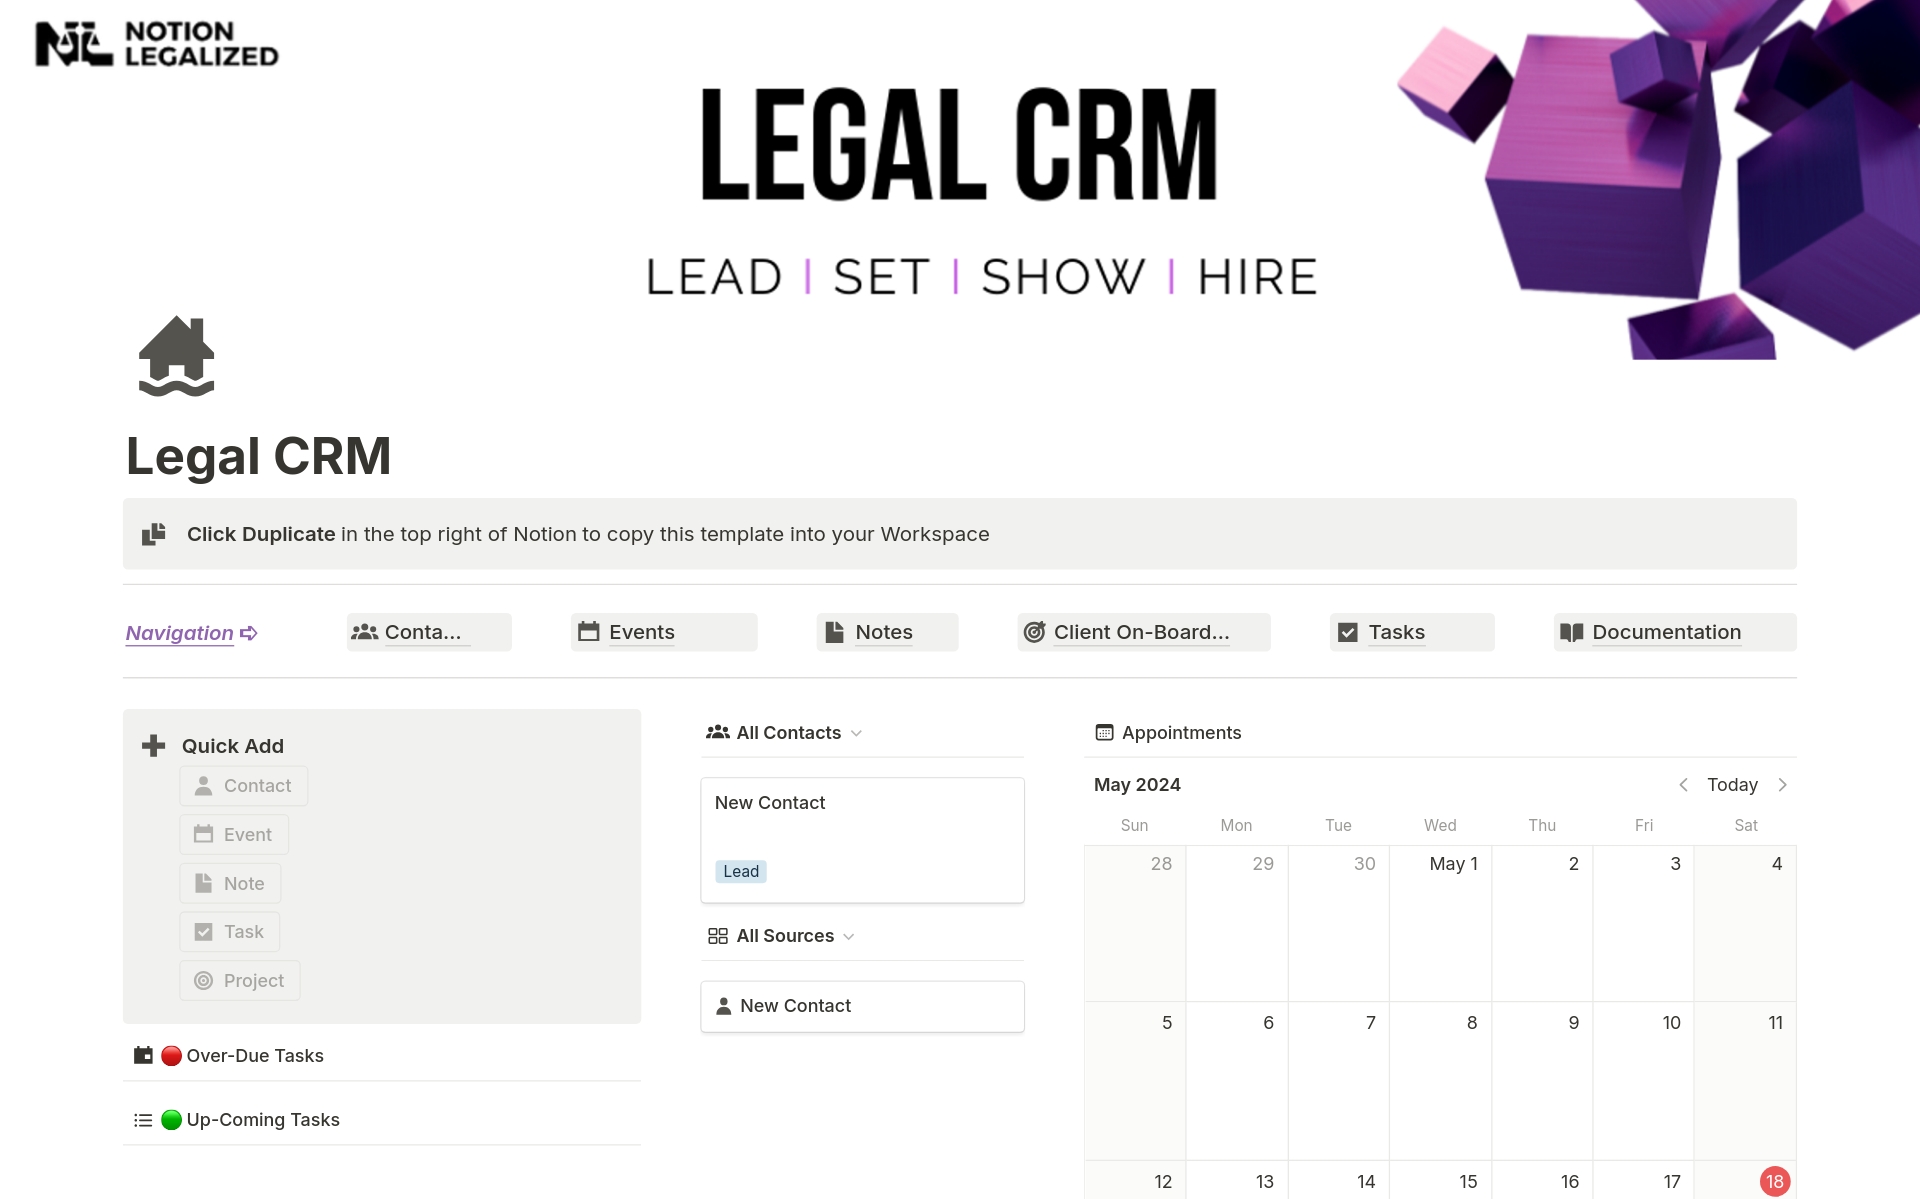 Optimize client management, enhance engagement, and drive growth with Notion Legal CRM. Experience the future of legal practice today!